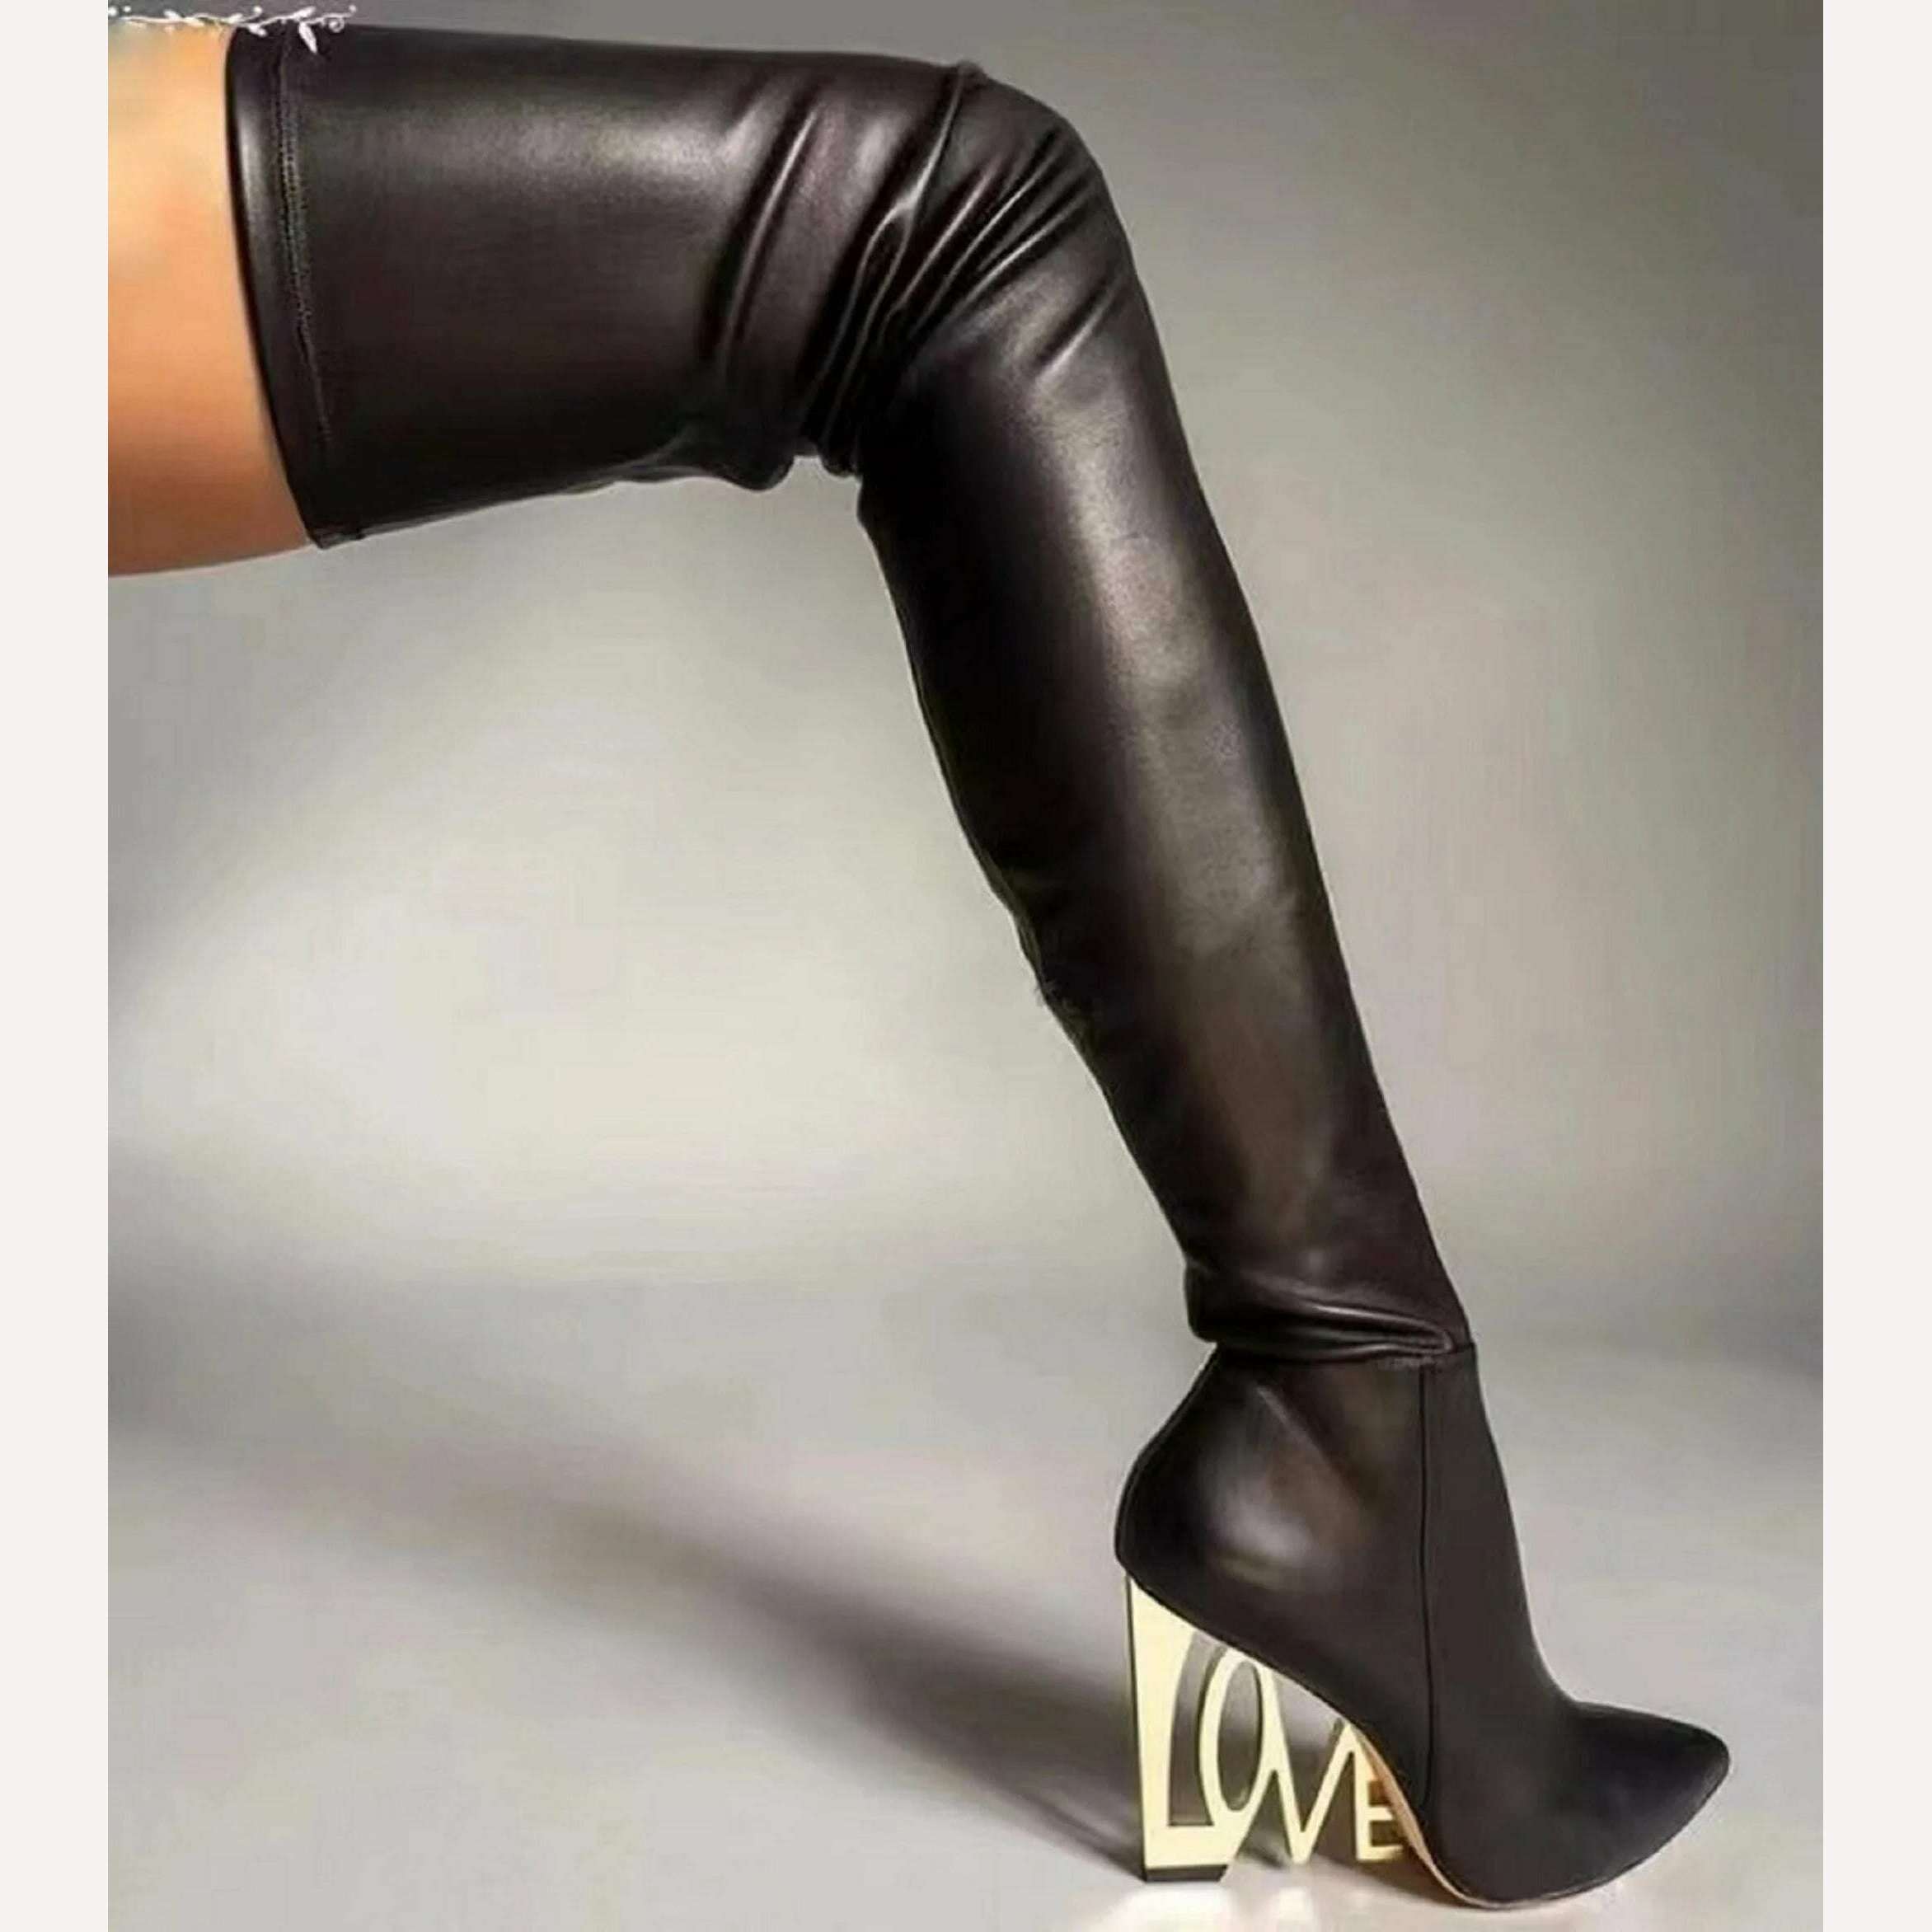 KIMLUD, 【JOCHEBED HU】Gold Plated Heel Love Wedge Bootie elasticity Pointy Toe Full Stretch Over the Knee Boots Size 33-44, black / 33, KIMLUD Womens Clothes